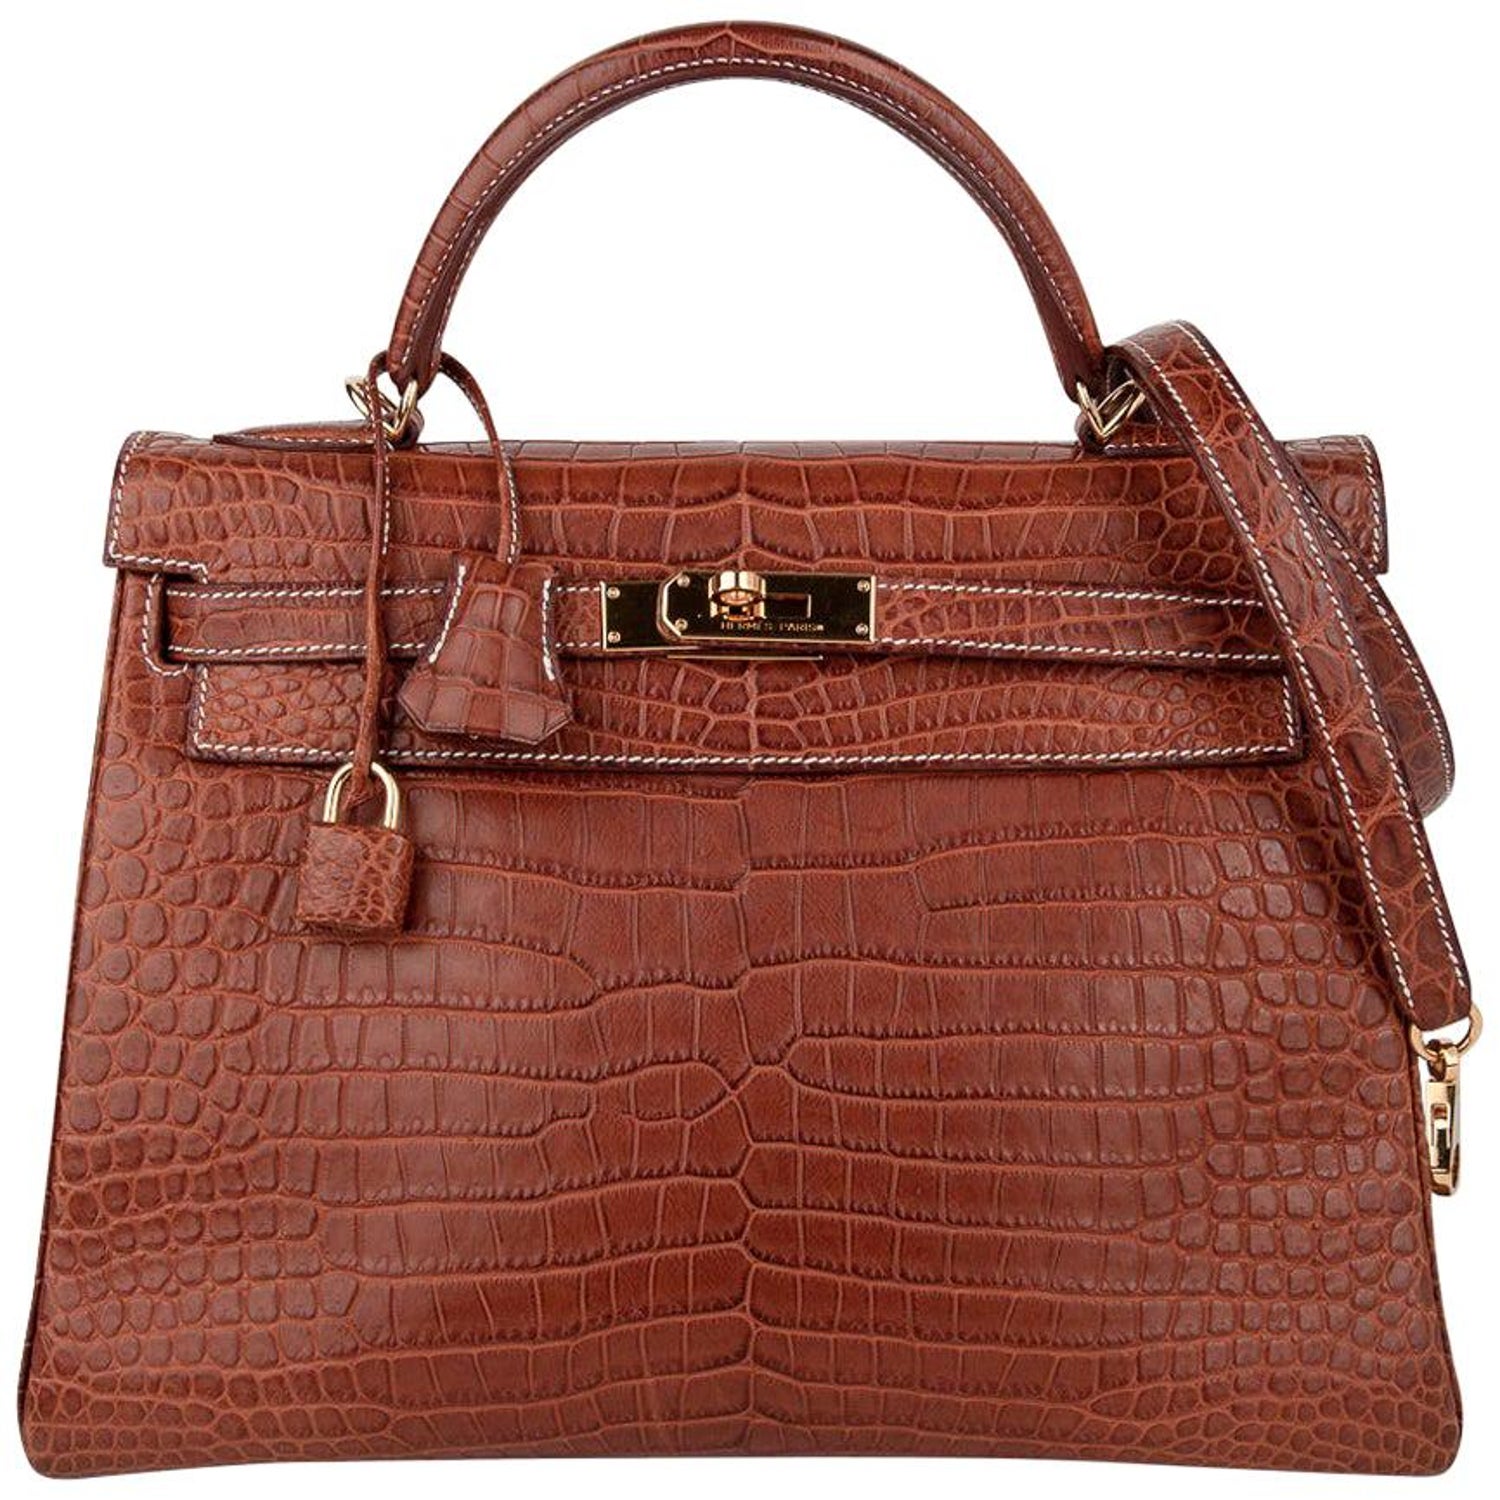 Hermes Limited Edition Kelly 32 Tri-Color Bag Tabac Camel, Ebene, & Pa –  Mightychic